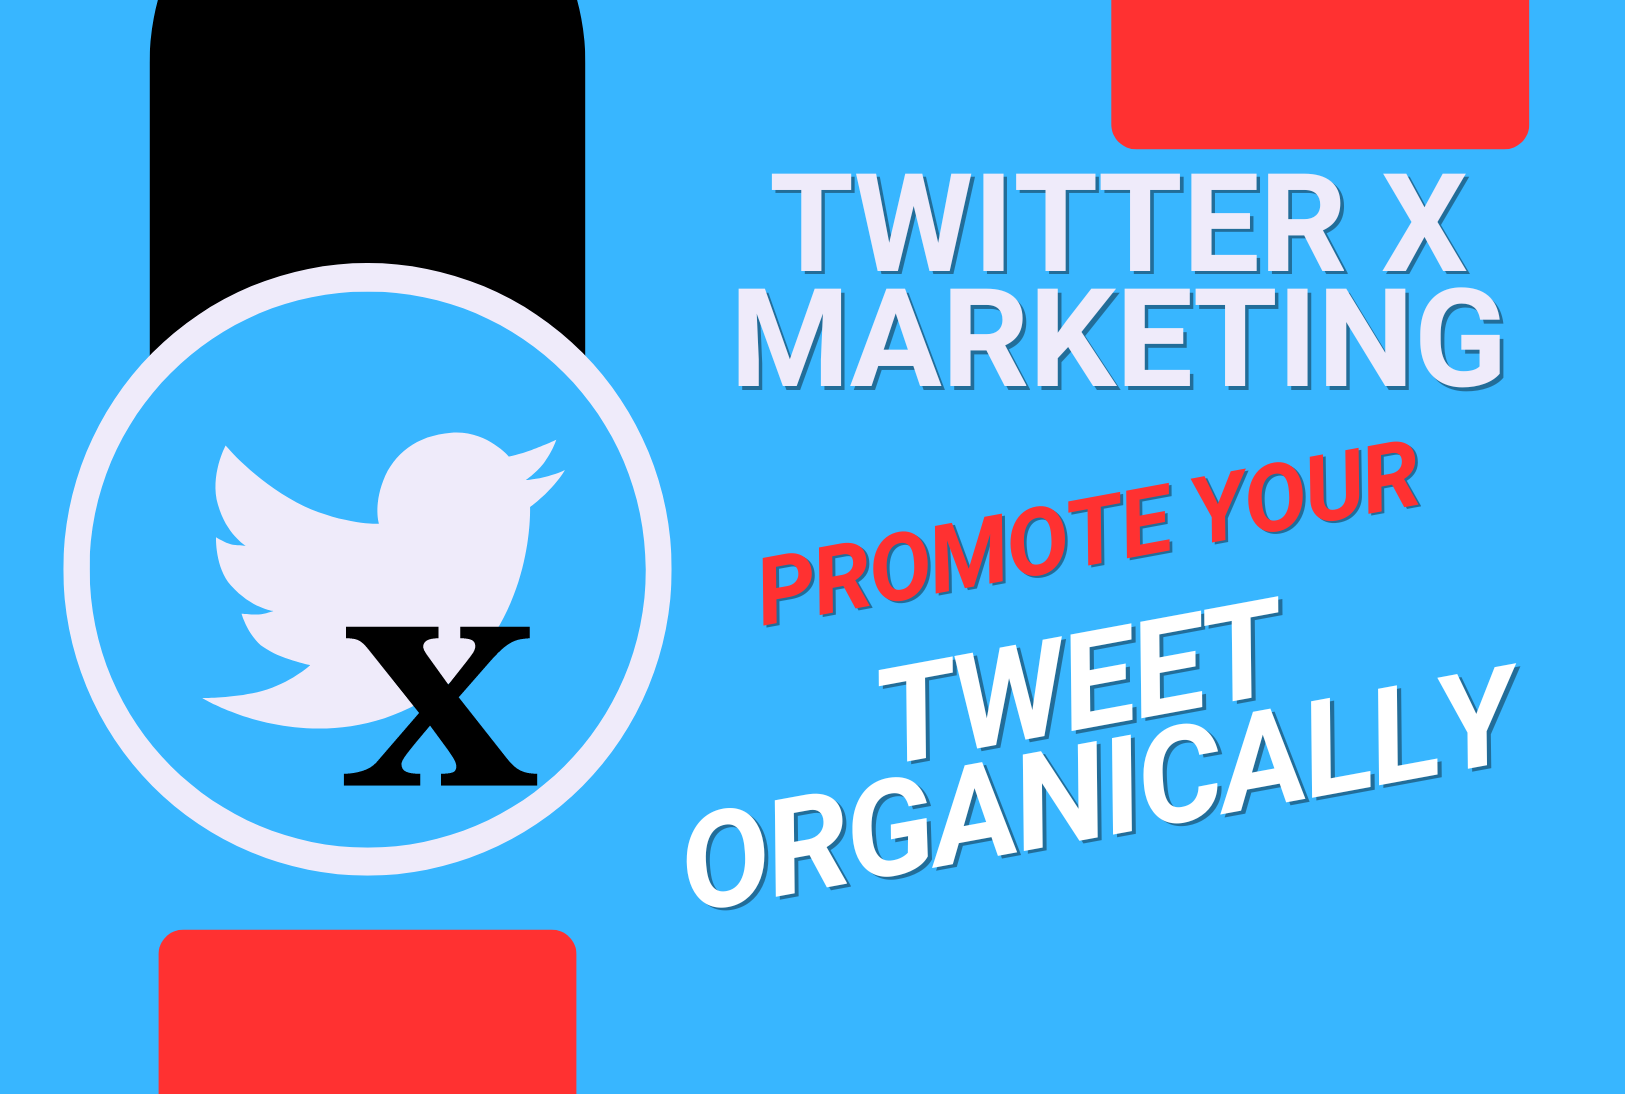 🚀 Get 200+ Retweets with bonus likes 💥  Twitter X marketing manually for real, organic tweet growth and engagement 🚀